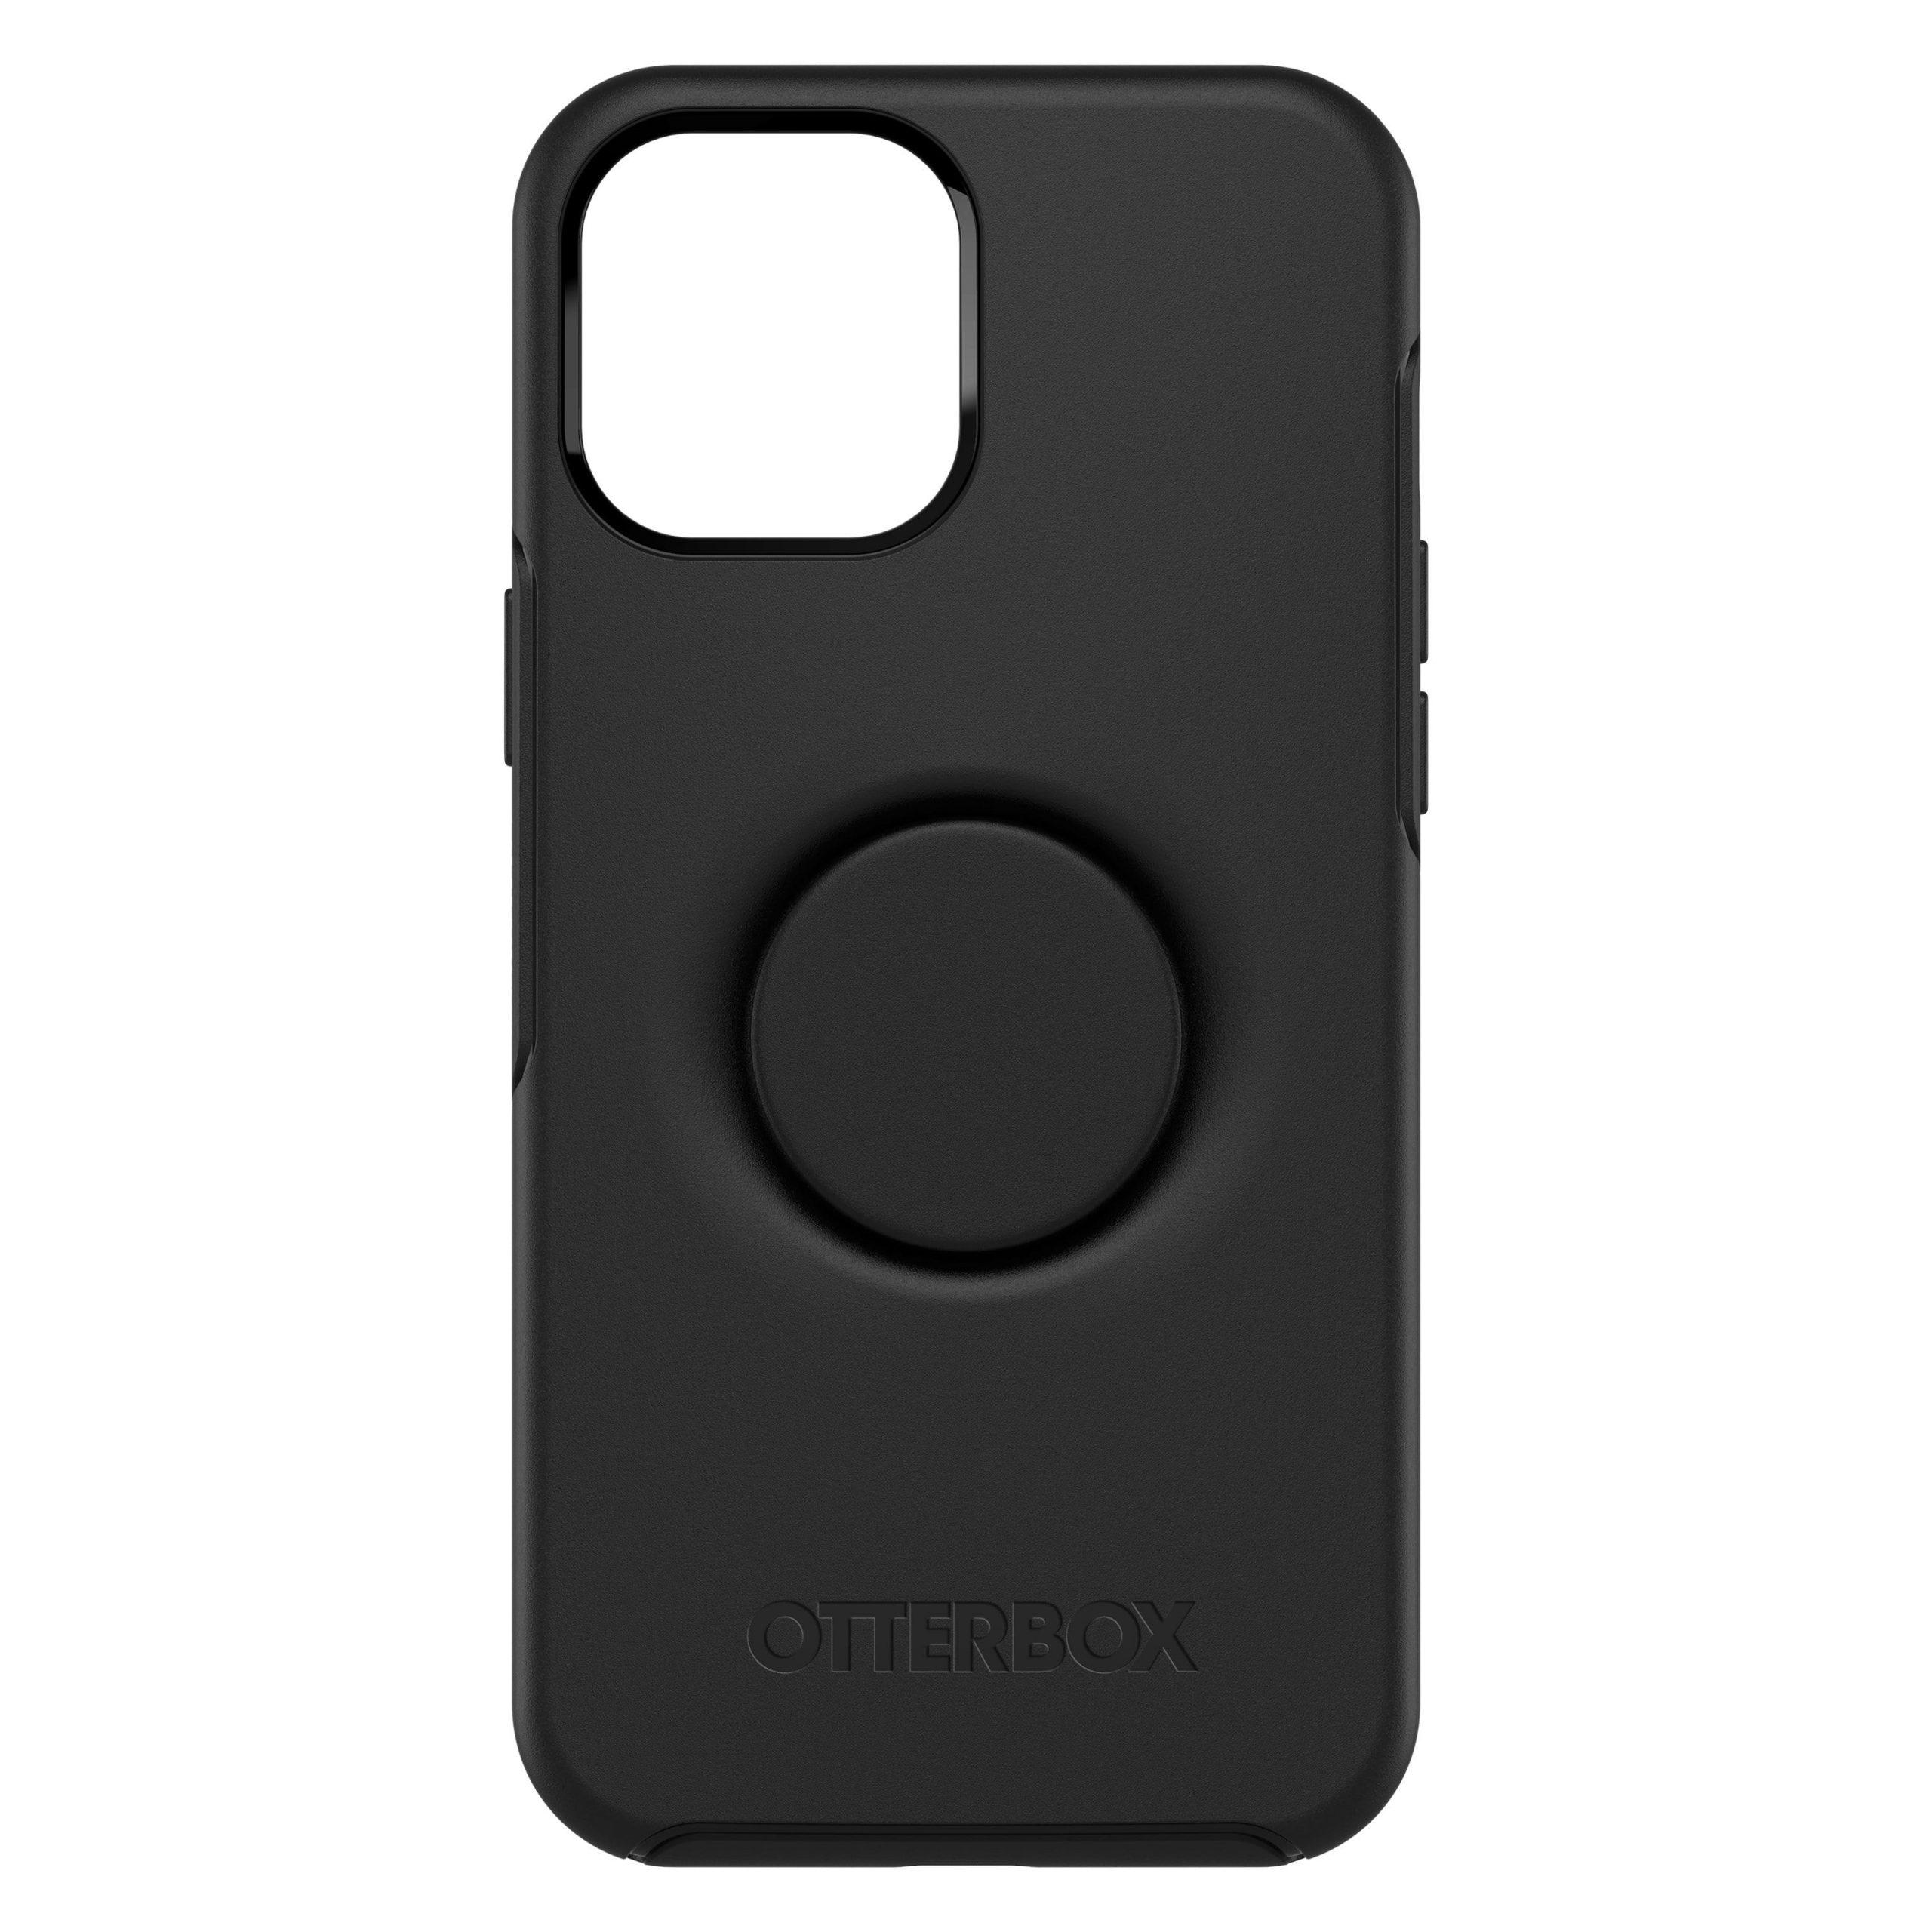 otterbox otter pop symmetry apple iphone 12 pro max case drop protection cover w popsocket phone holder slim protective selfie case wireless charging compatible black